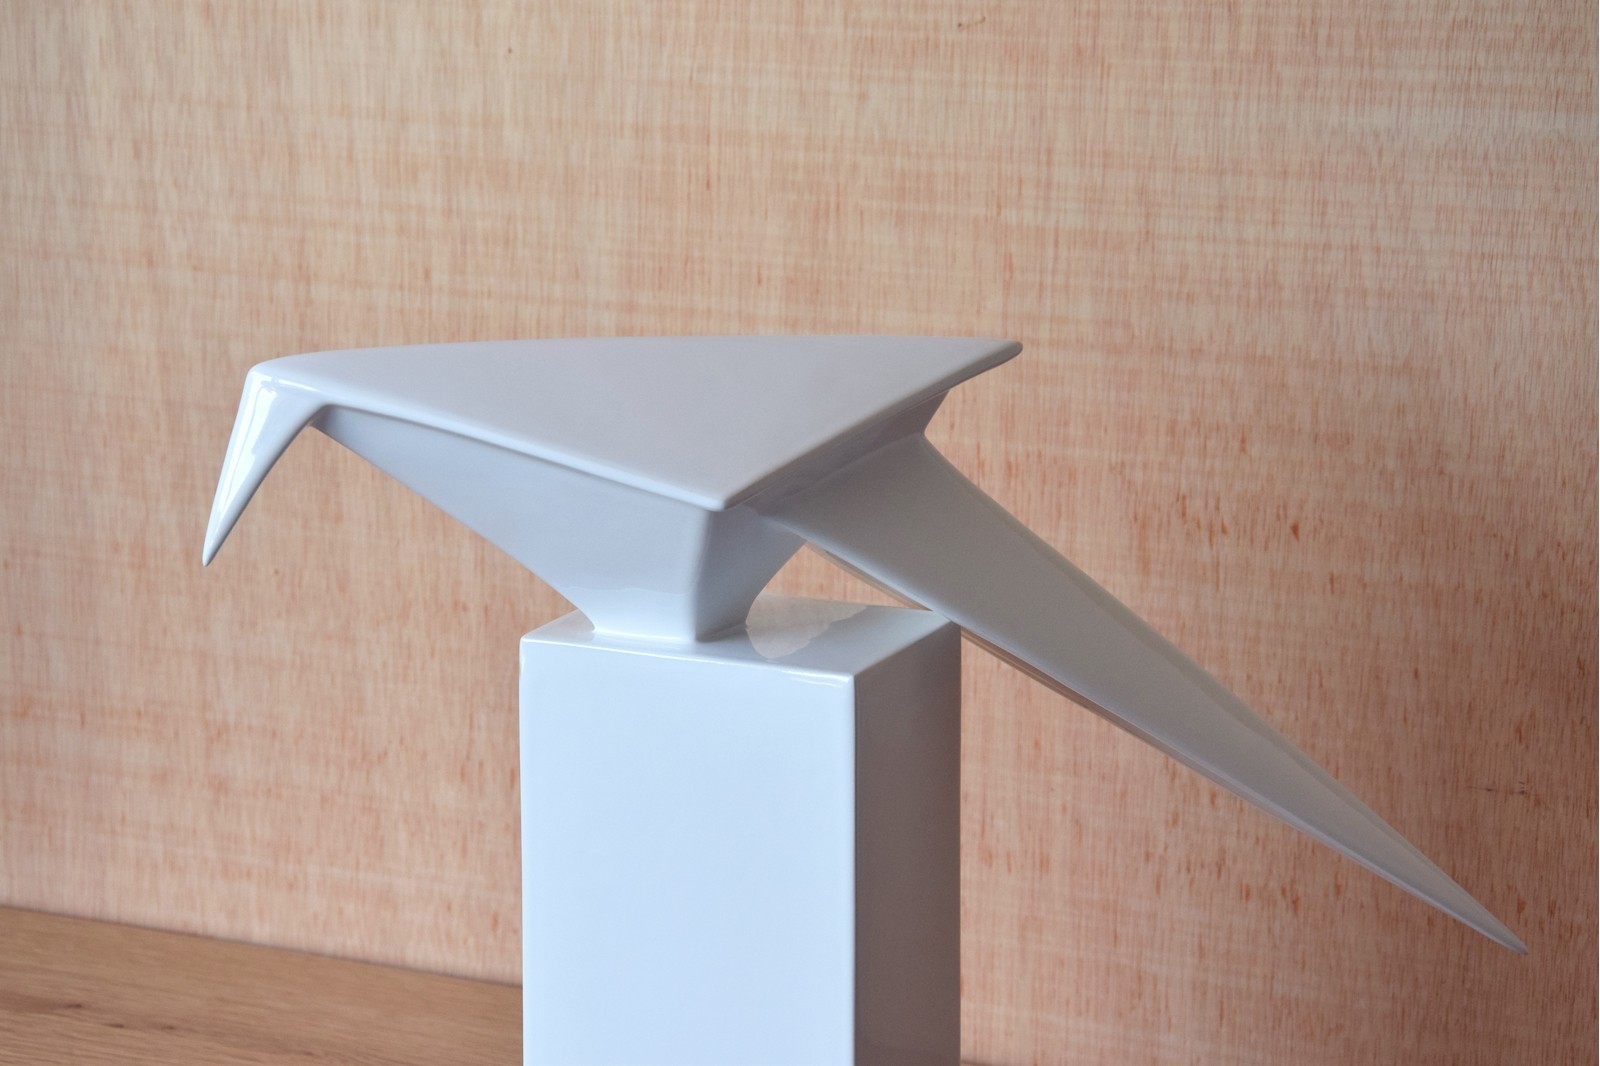 ORIGAMI BIRD COLLECTION. CERAMIC SCULPTURE WHITE GLOSSY